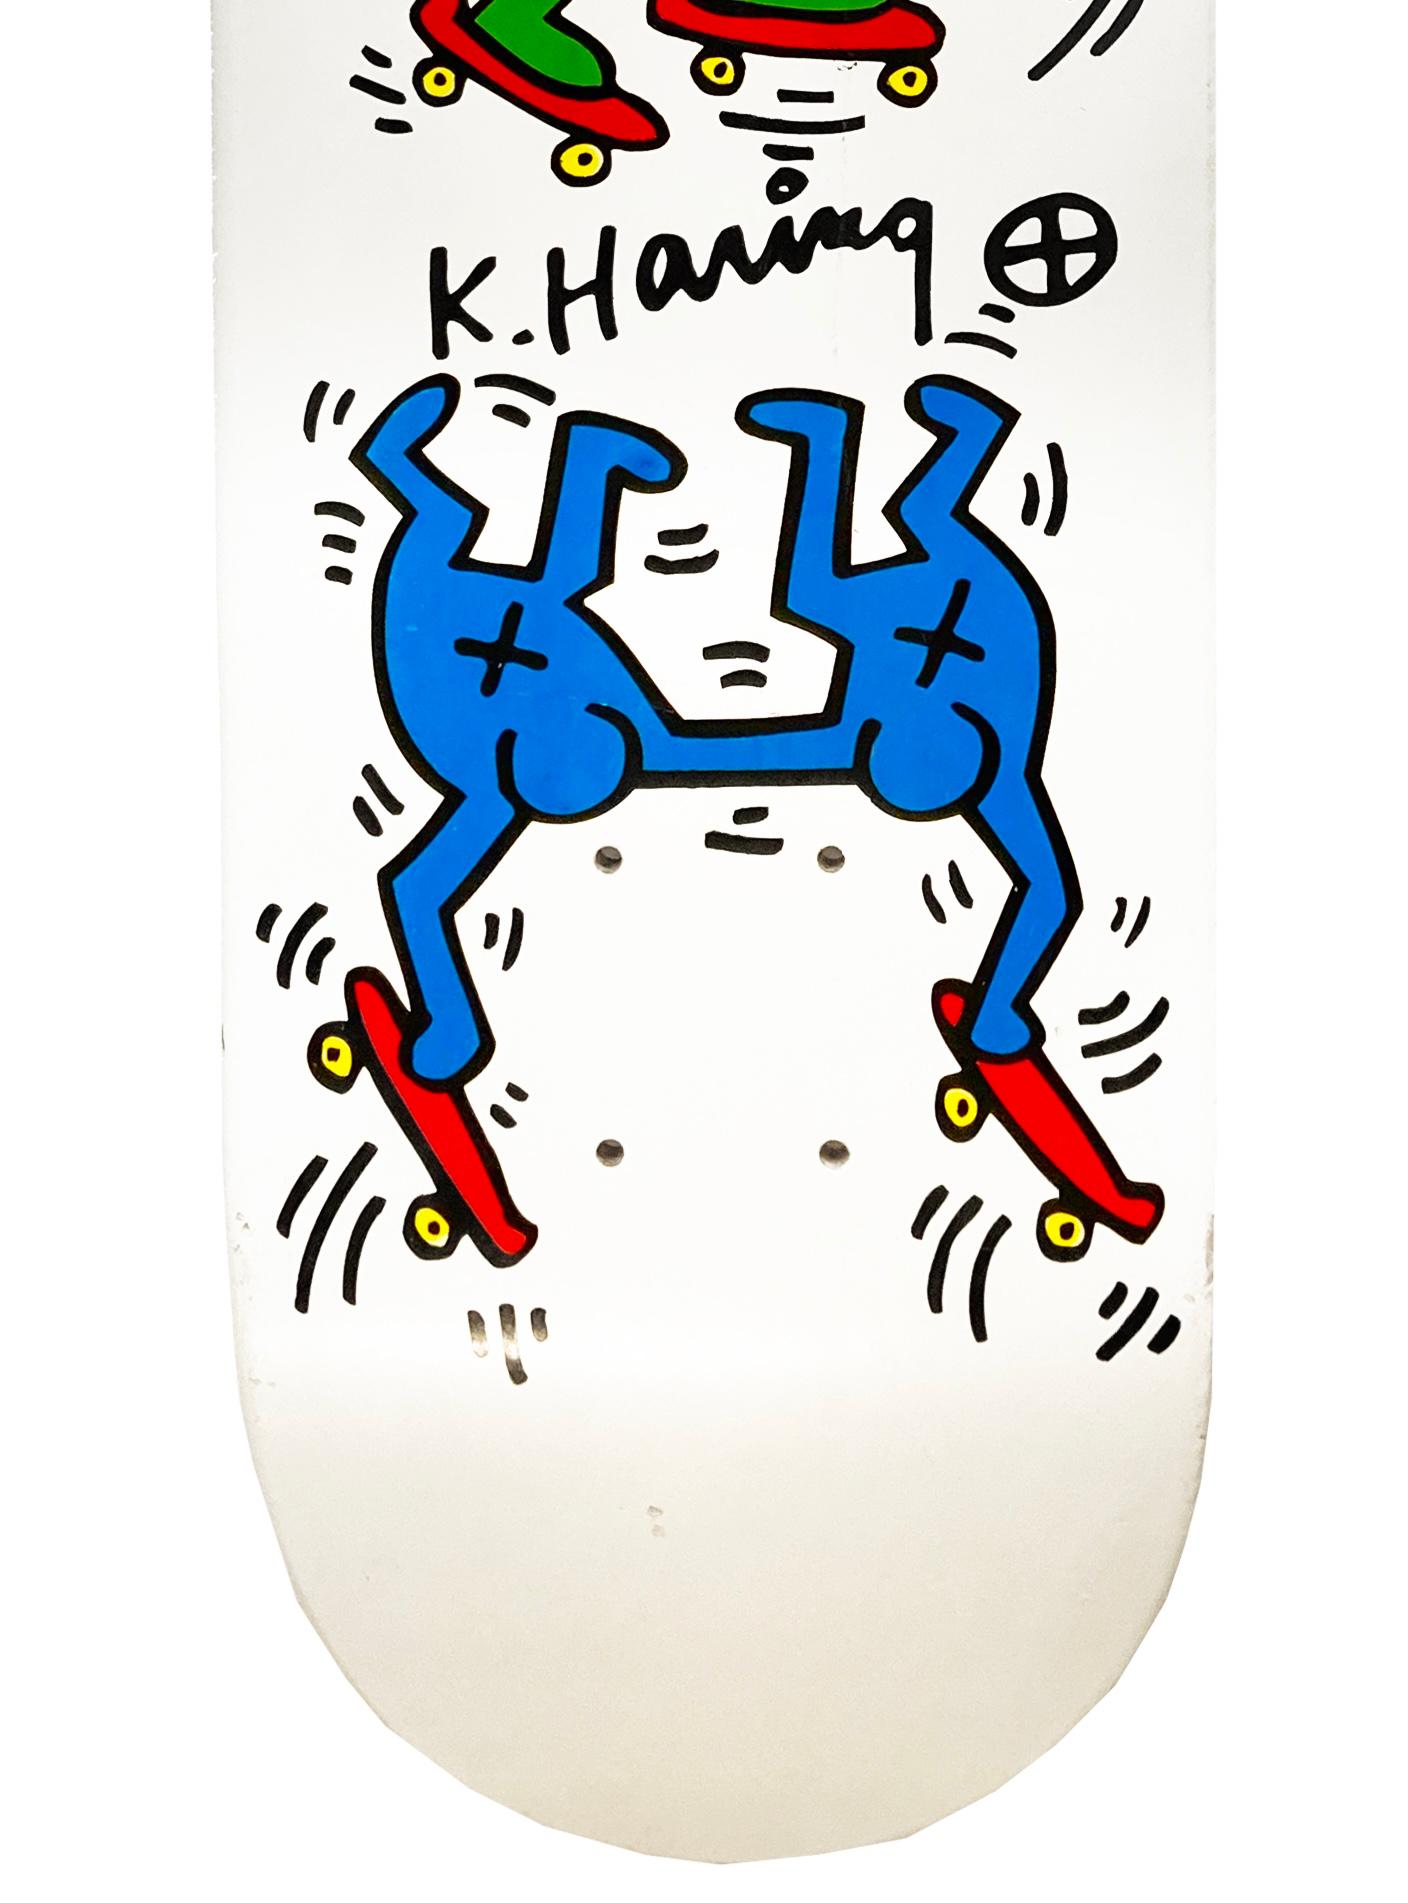 Keith Haring Pop Shop Skateboard Deck circa early/mid 1990s:

In the mid 1980s New York City Skateboards Inc. negotiated a contract with Haring to design and license skateboard images. Approximately 200 of these skateboards were produced & sold at